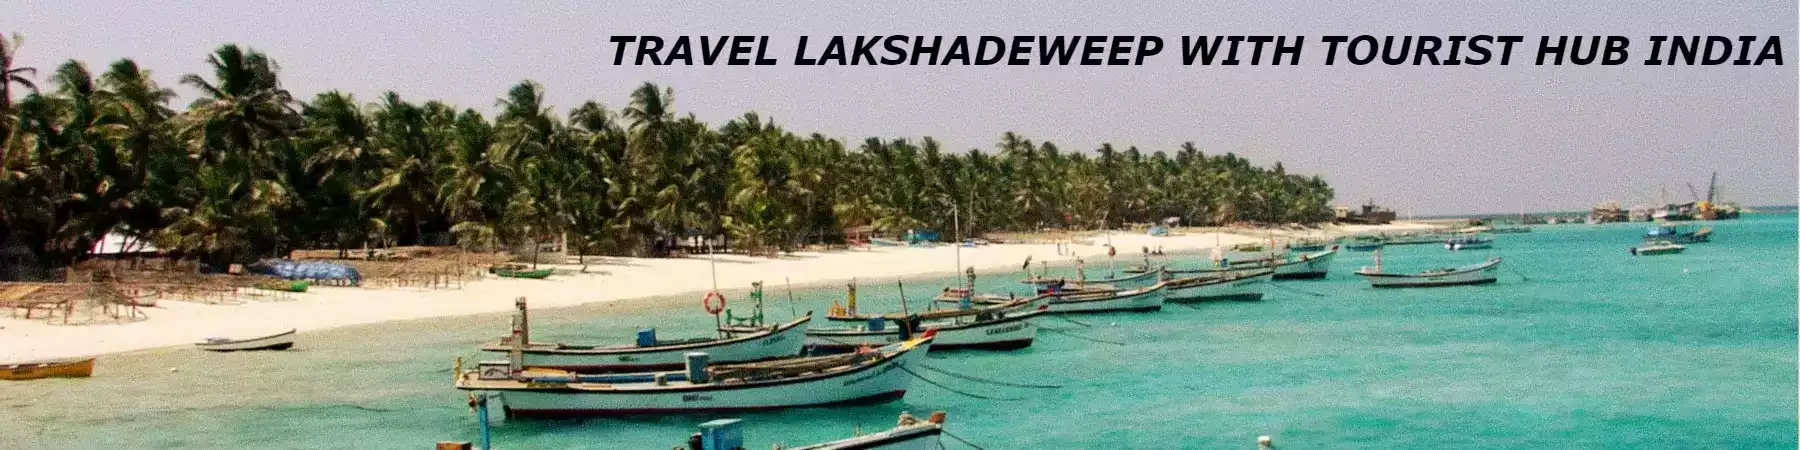 Lakshadweep holiday packages from Chennai with Tourist Hub India - The Best Lakshadweep Travel Agency